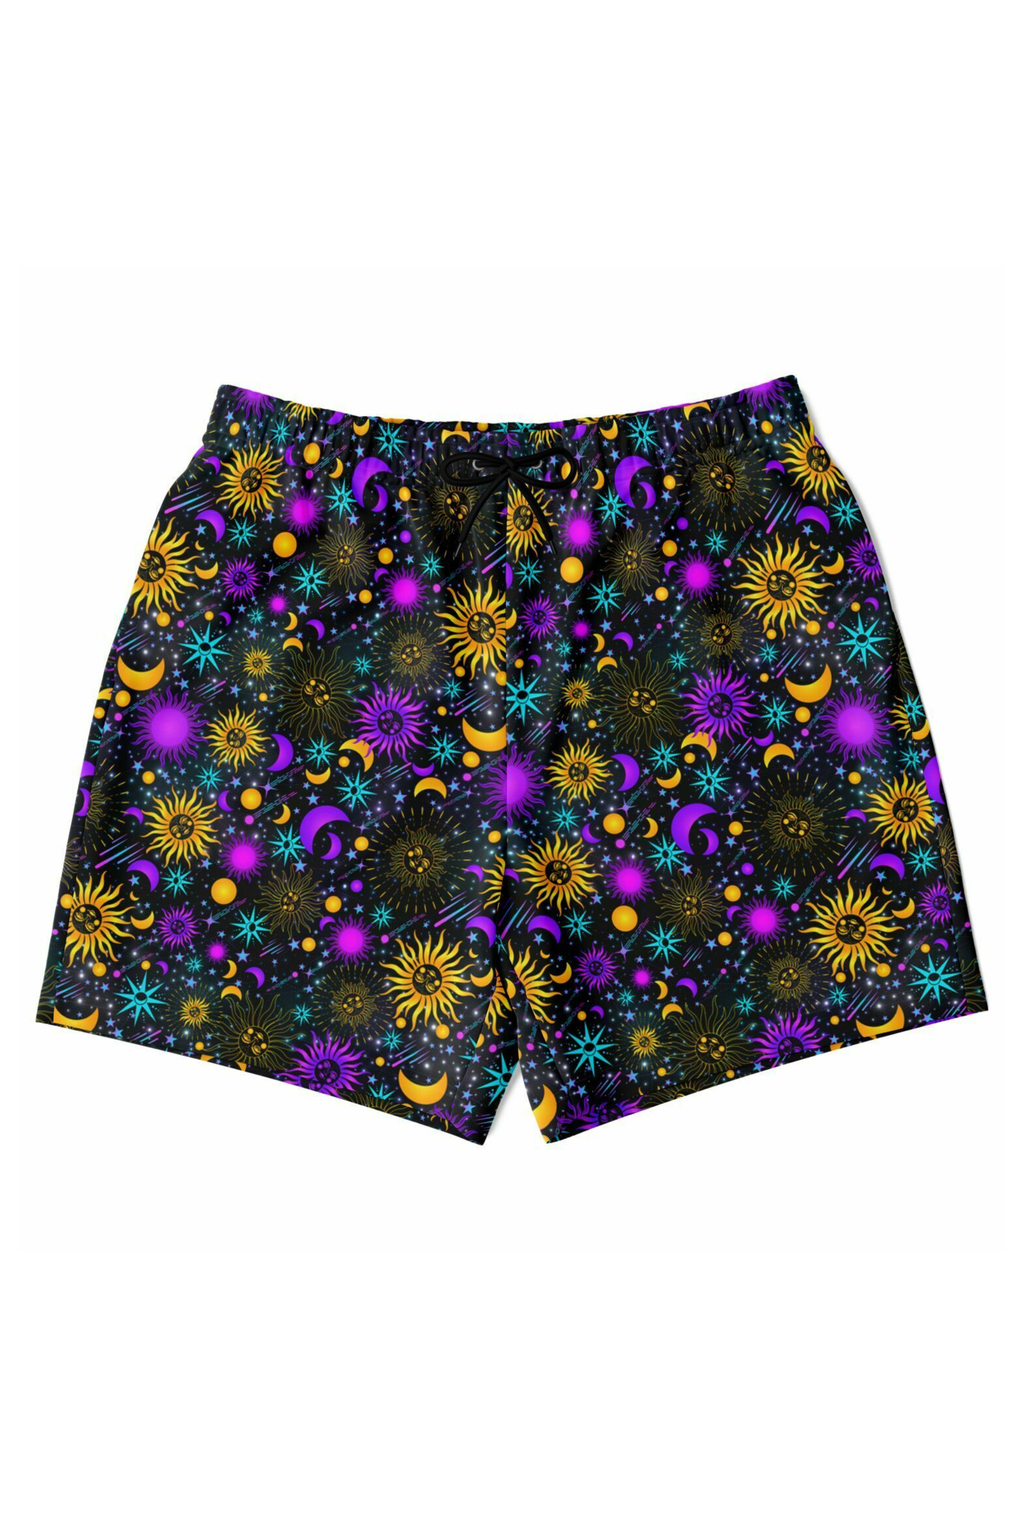 Electric Eden Unisex Shorts (Made to Order) - Celestial Soul